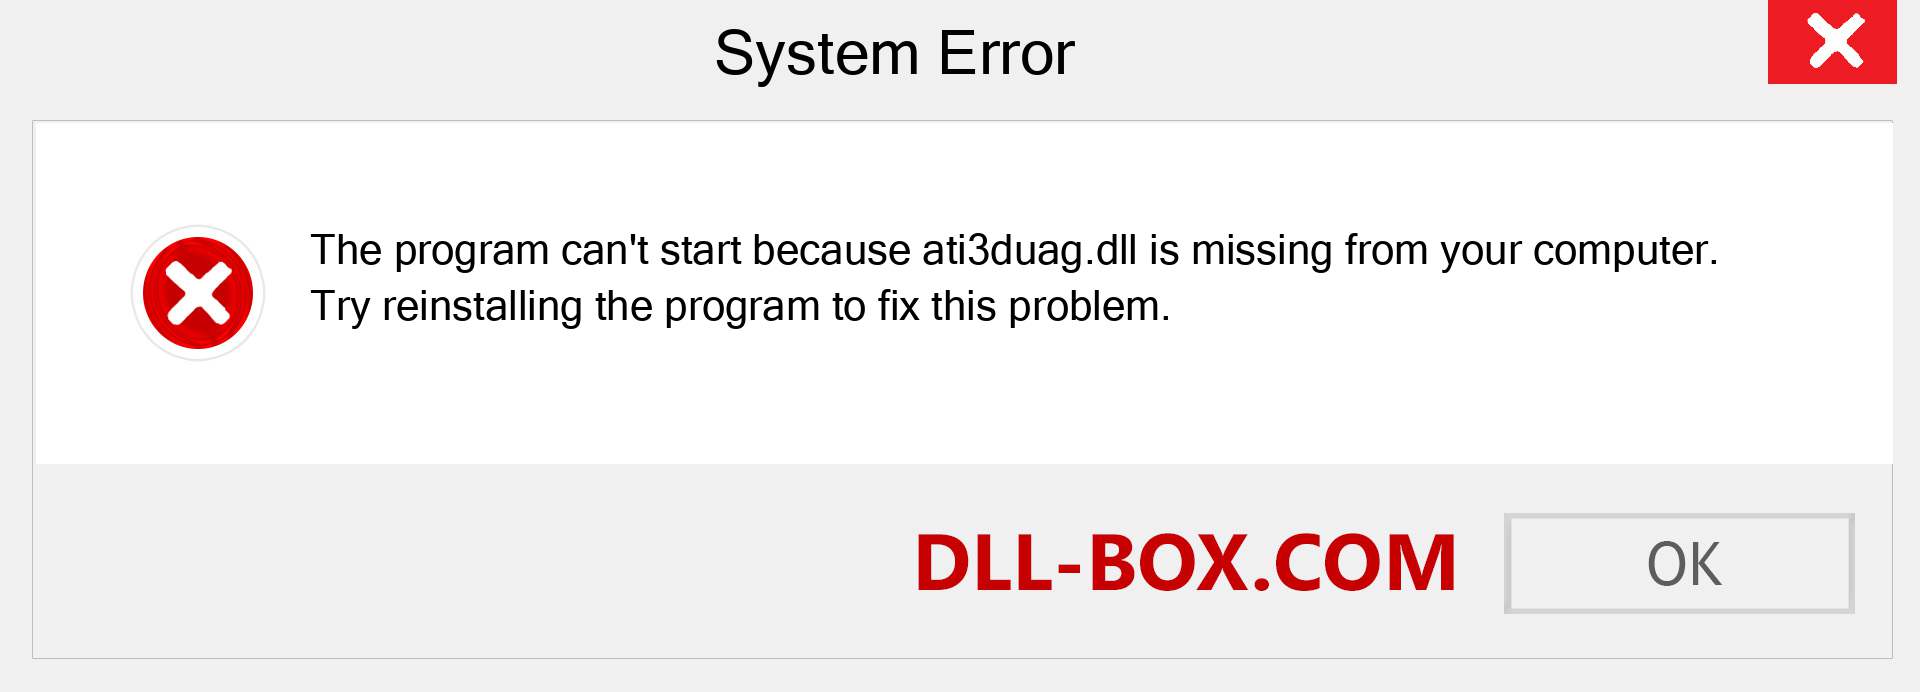  ati3duag.dll file is missing?. Download for Windows 7, 8, 10 - Fix  ati3duag dll Missing Error on Windows, photos, images